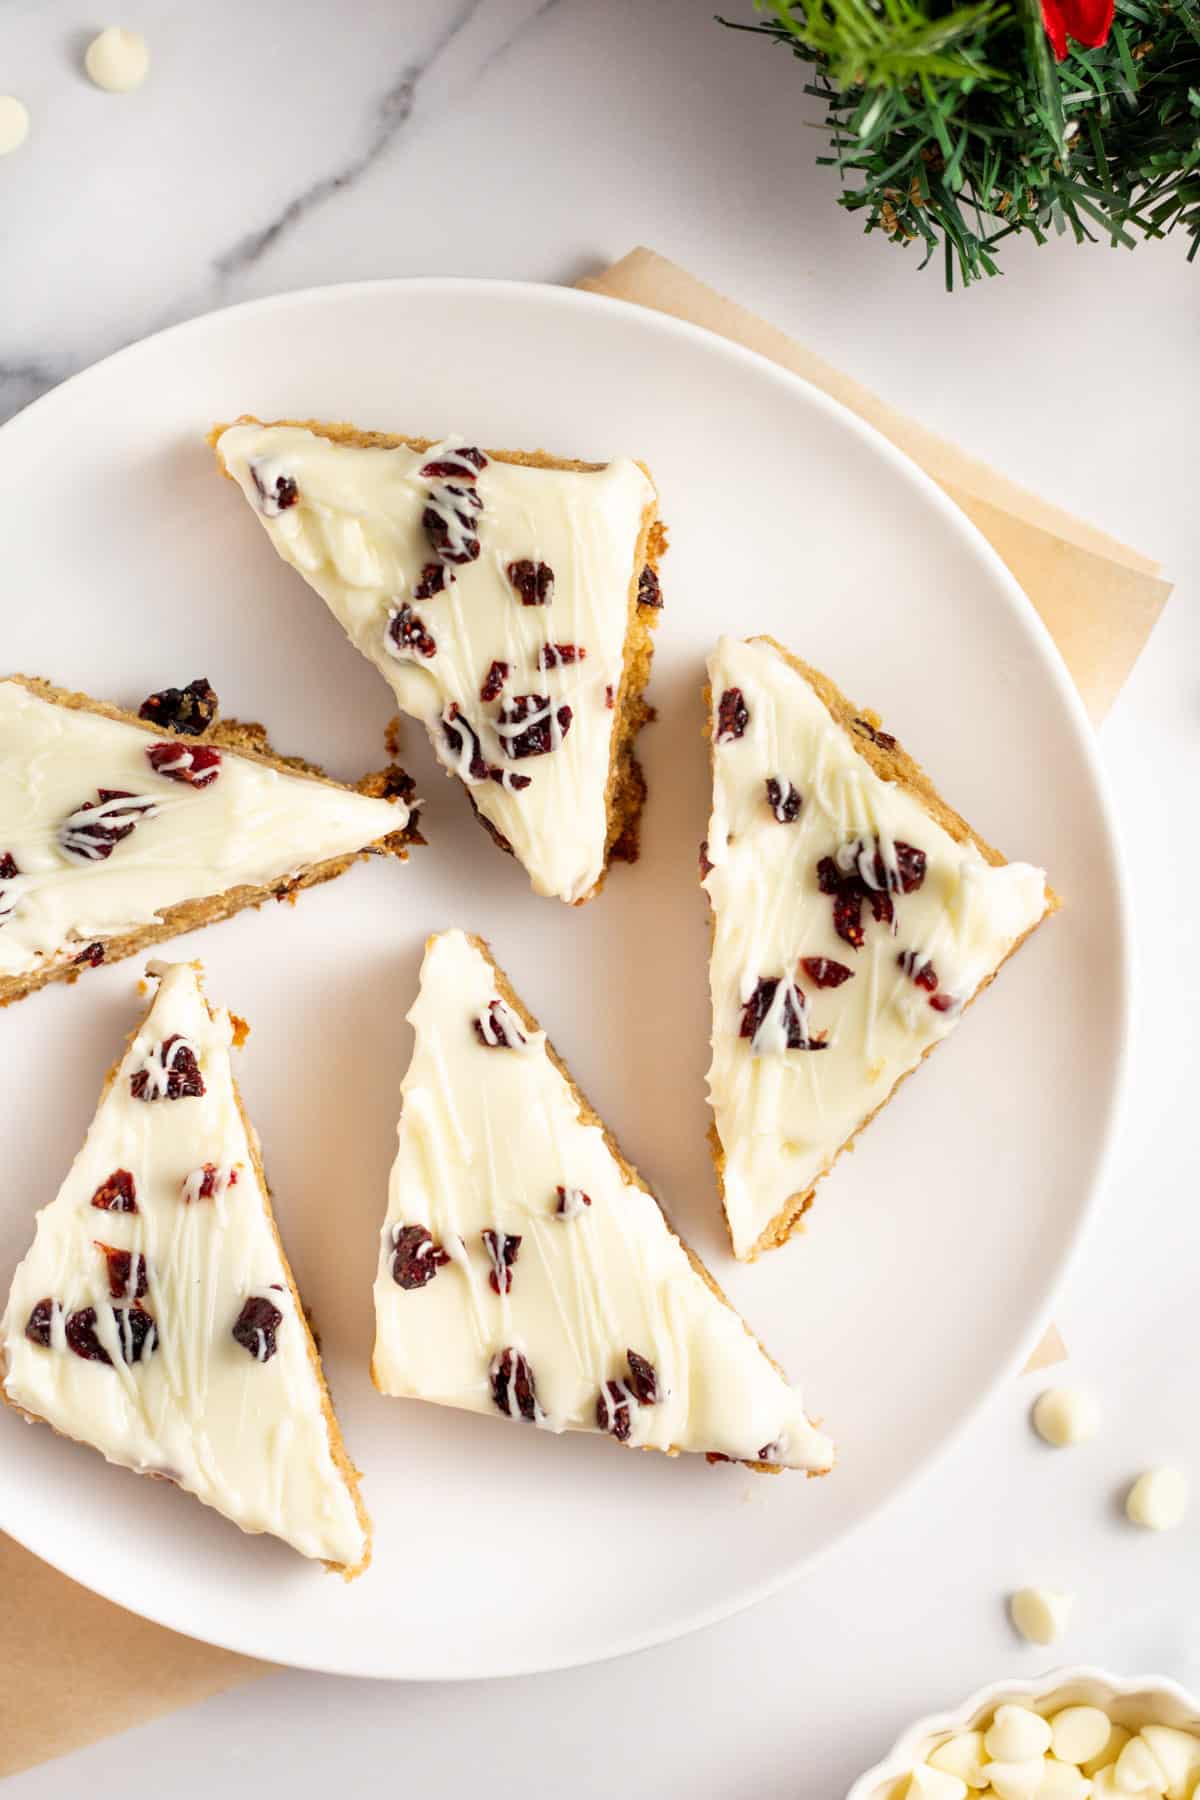 cranberry bliss bars cut into triangles served on a white plate